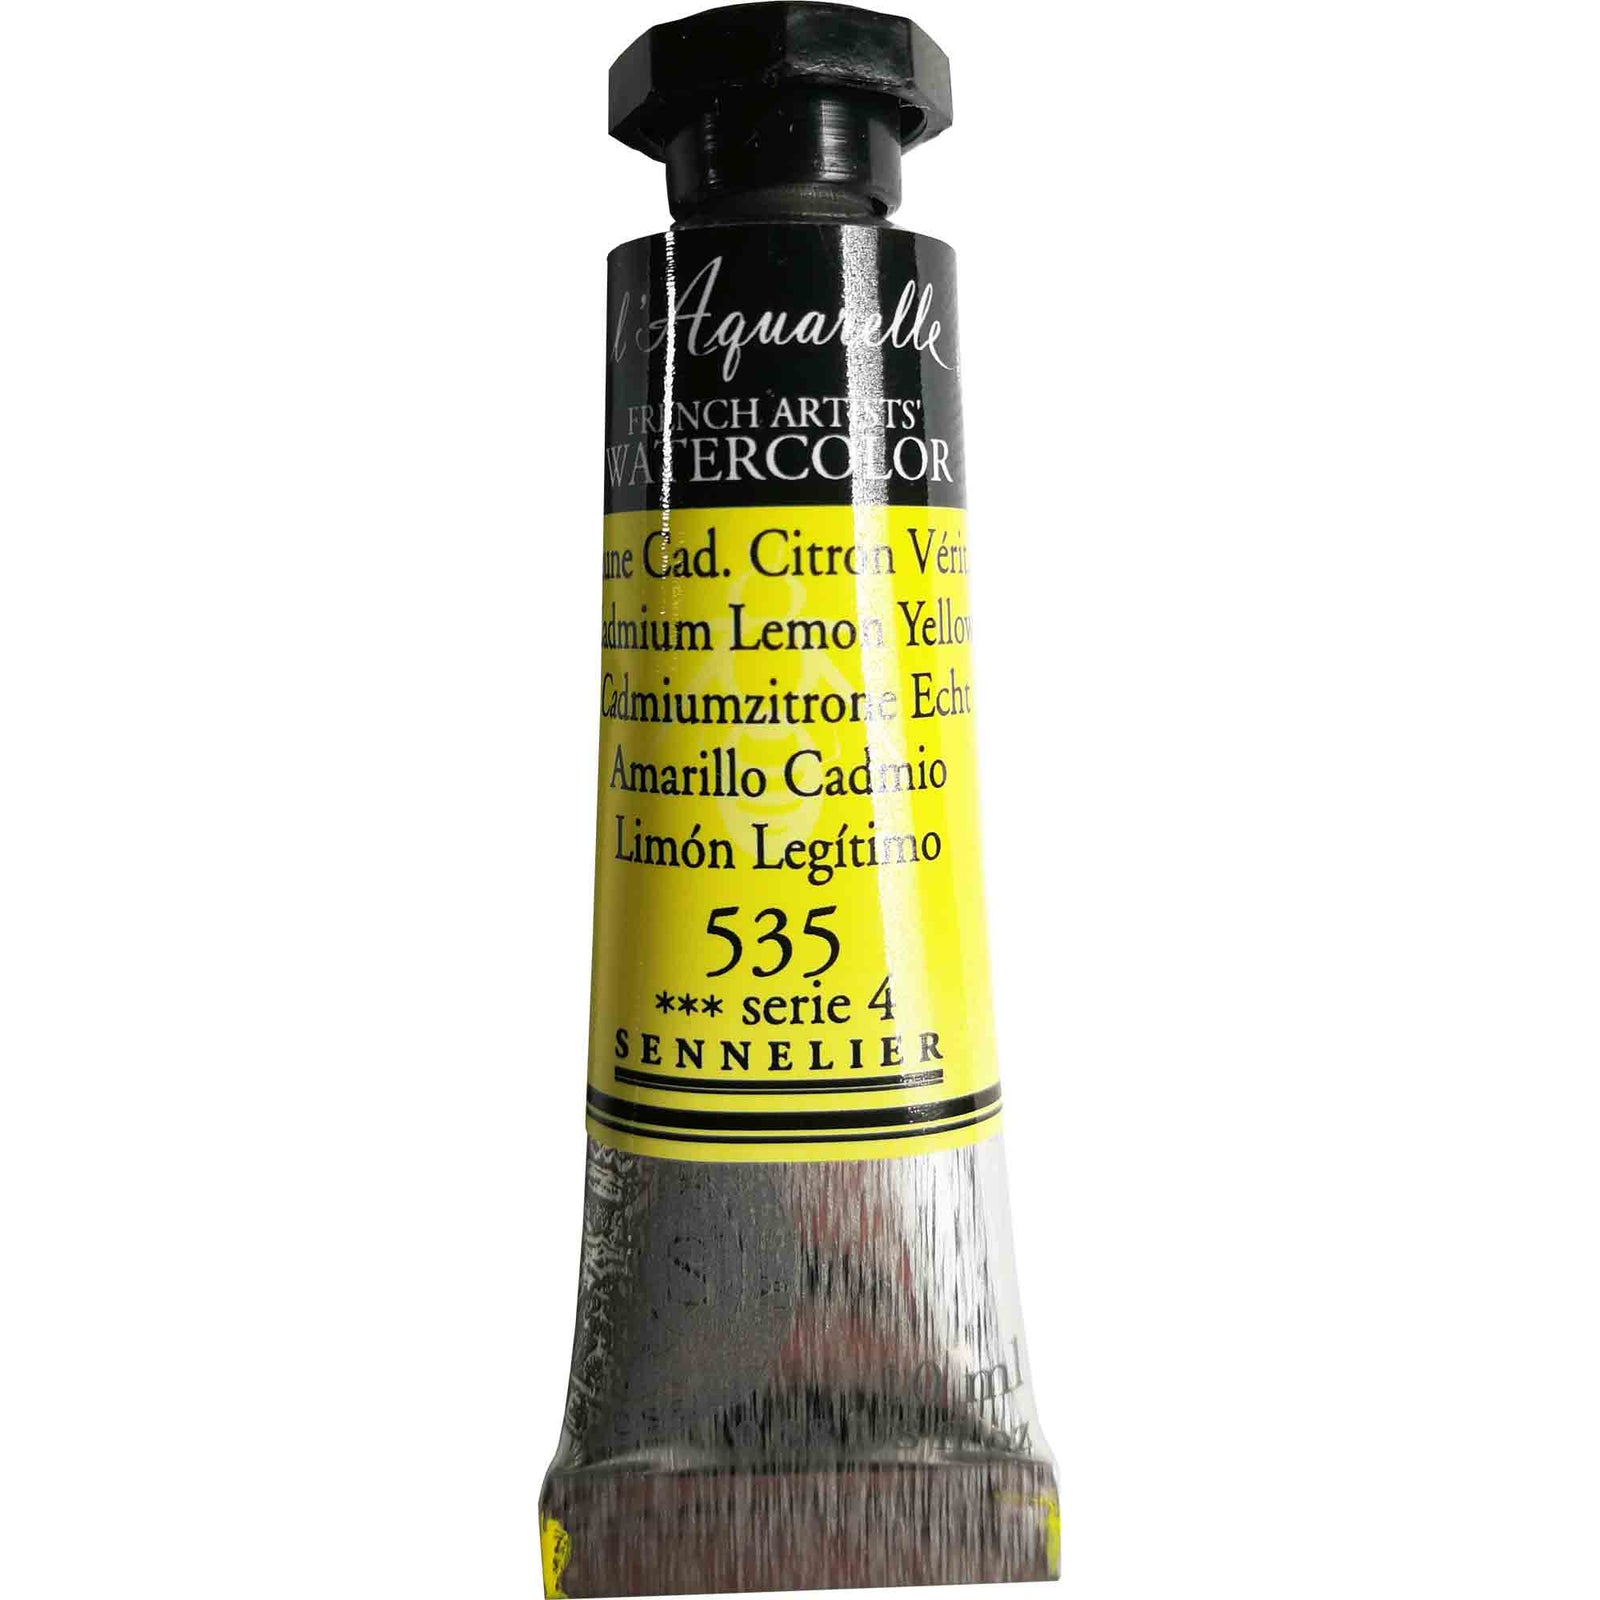 Sennelier French Artists' Watercolor - Iridescent Yellow 10 ml